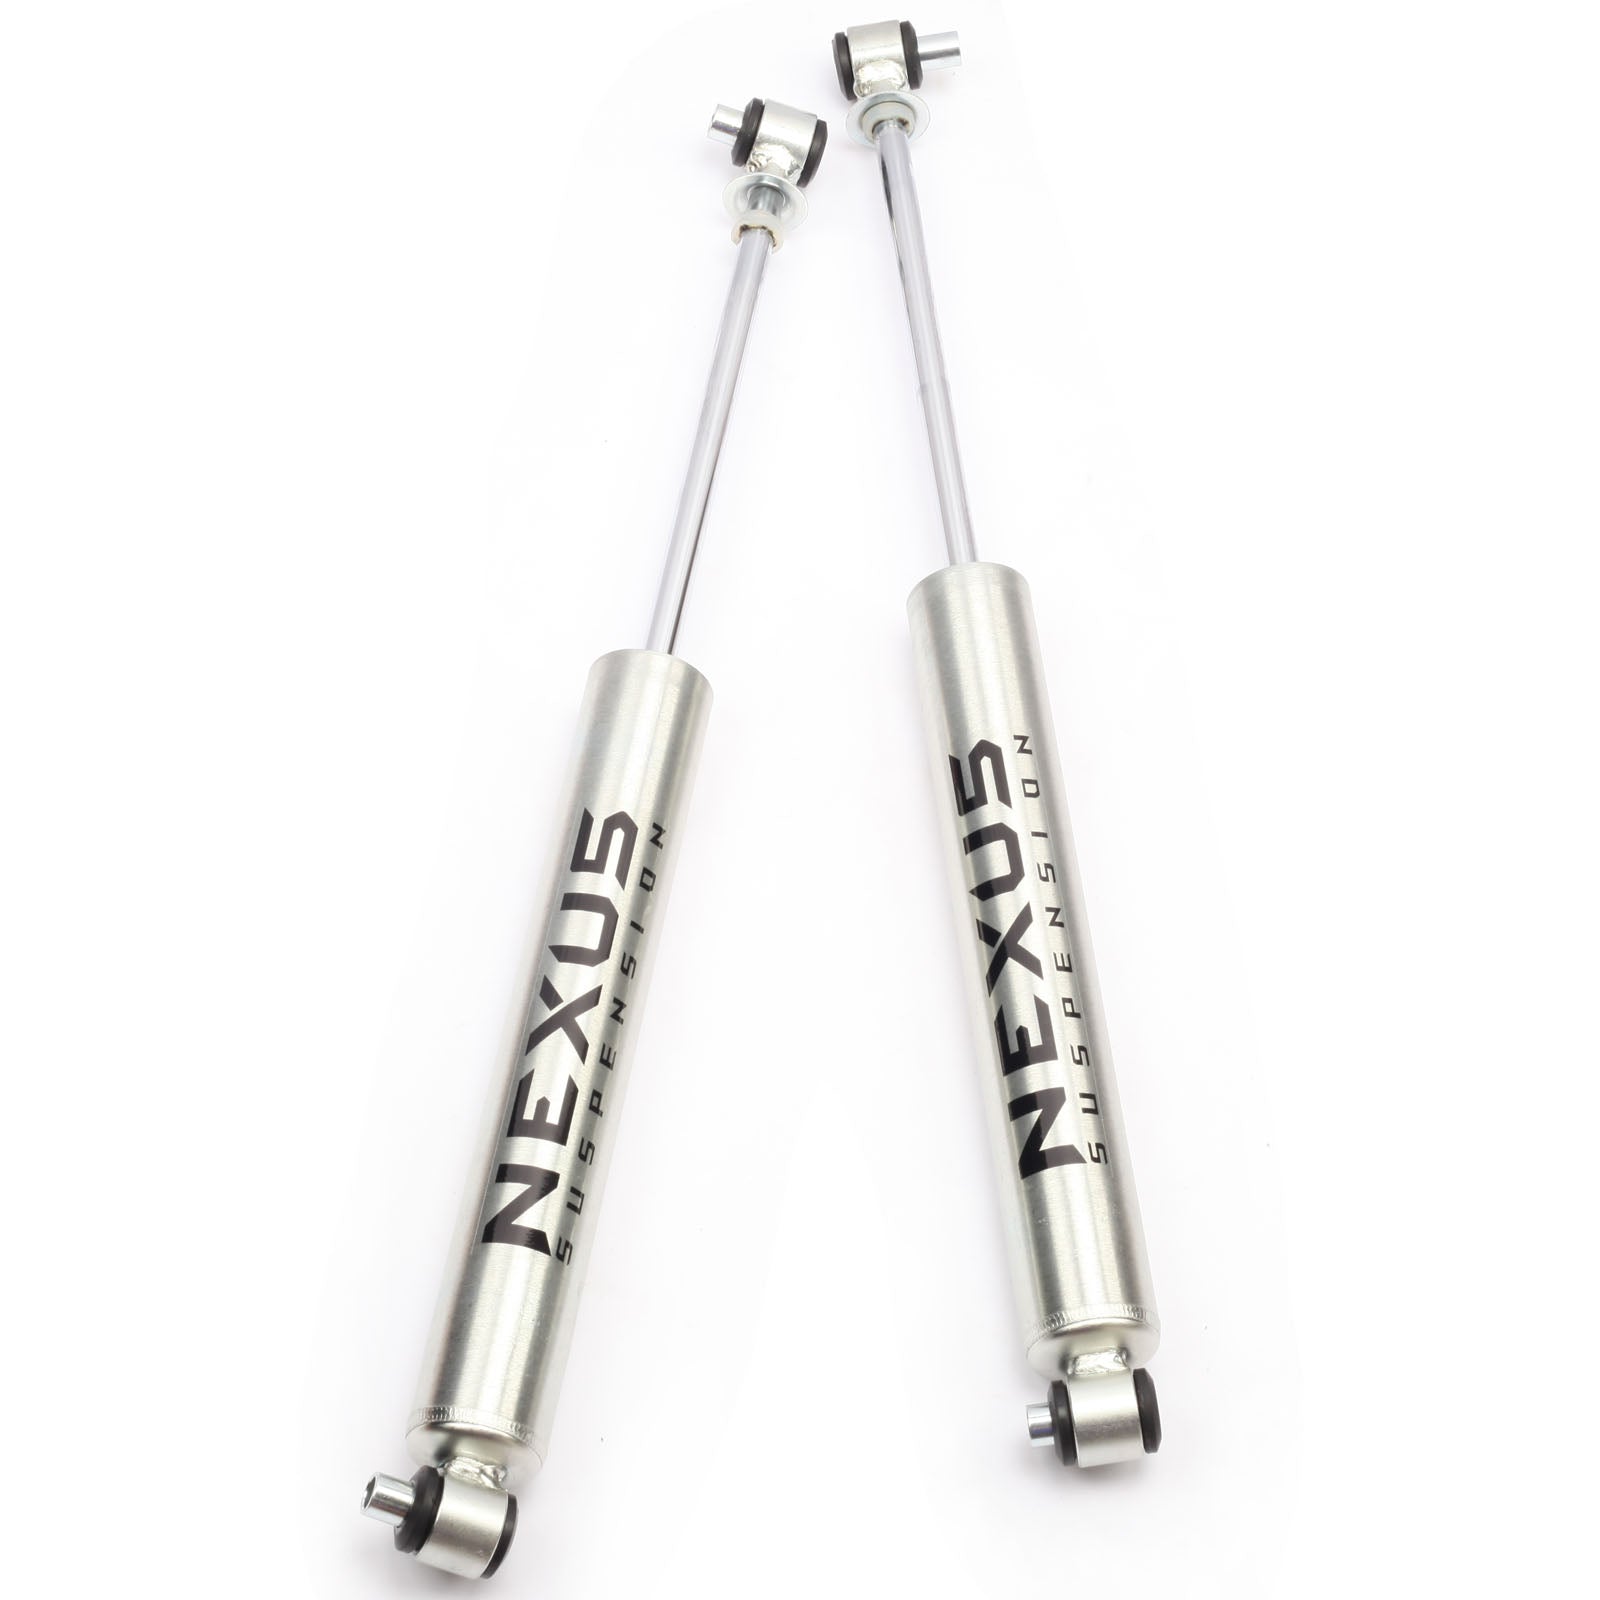 NEXUS SUSPENSION Rear Shock Absorber fits Suspension Lifted 0-4